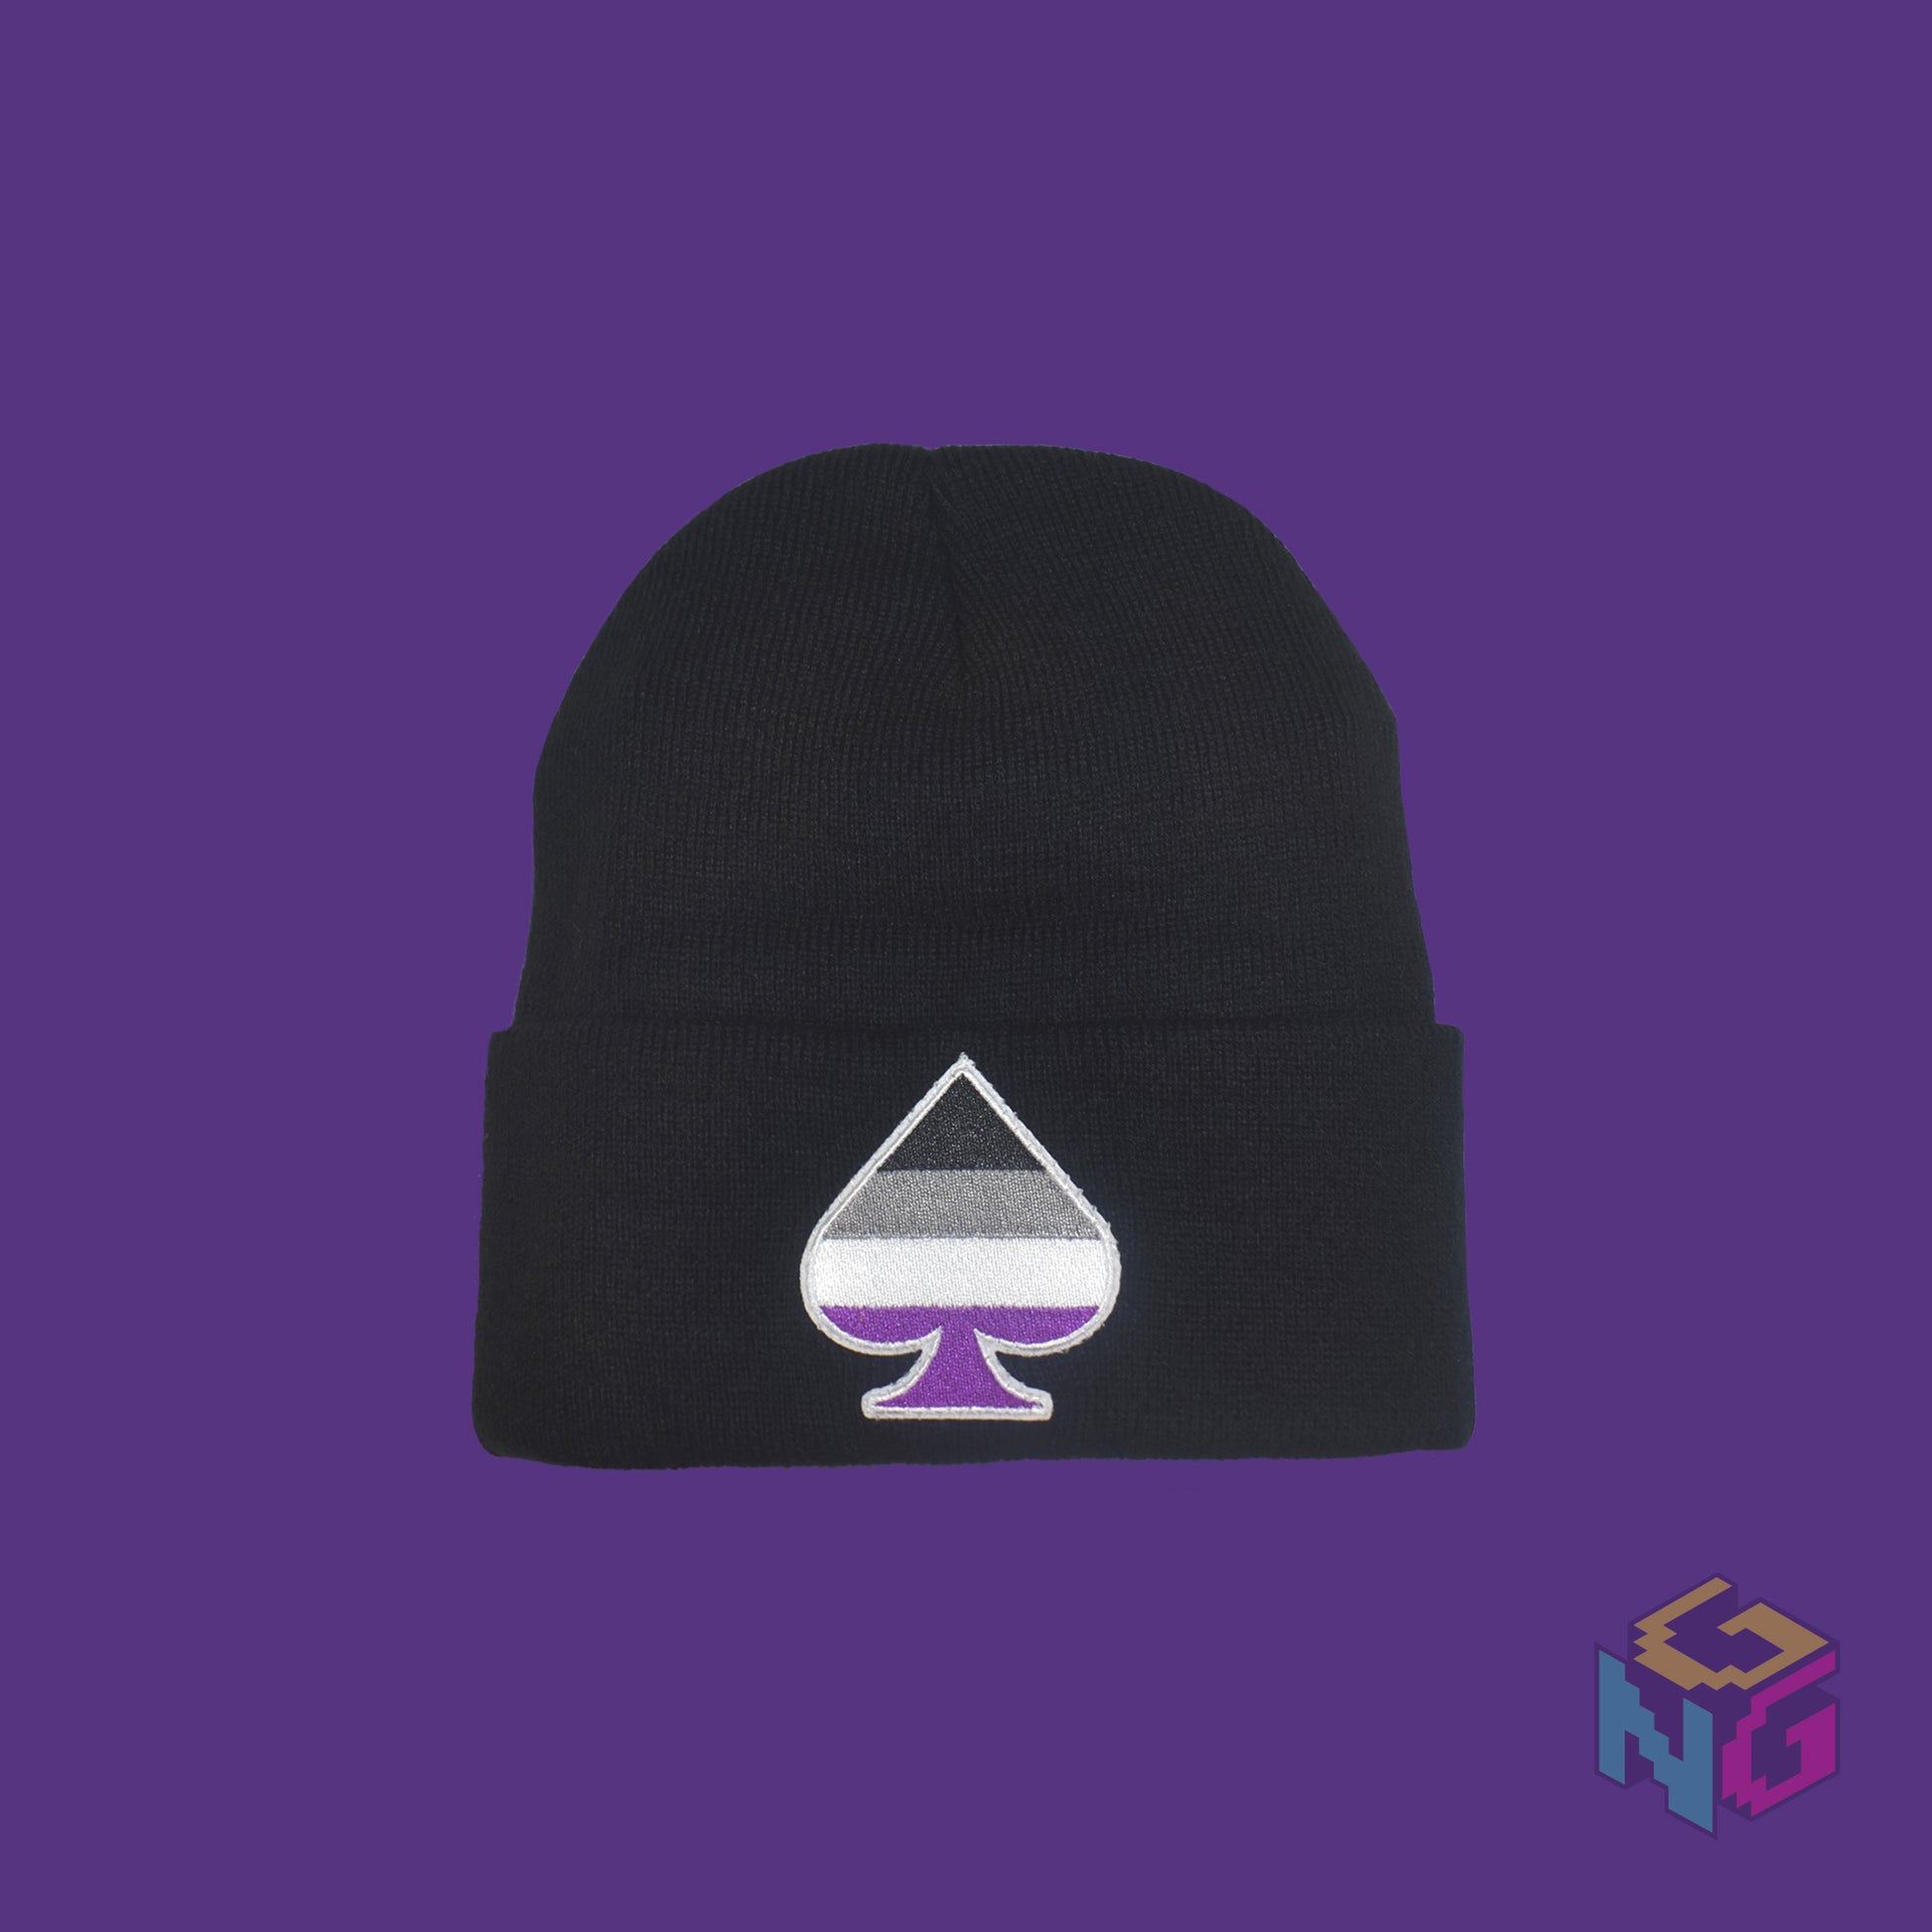 Black knit fabric beanie with the asexual ace of spades symbol in asexual black, white, grey, and purple on the front. It is laying flat on a purple background